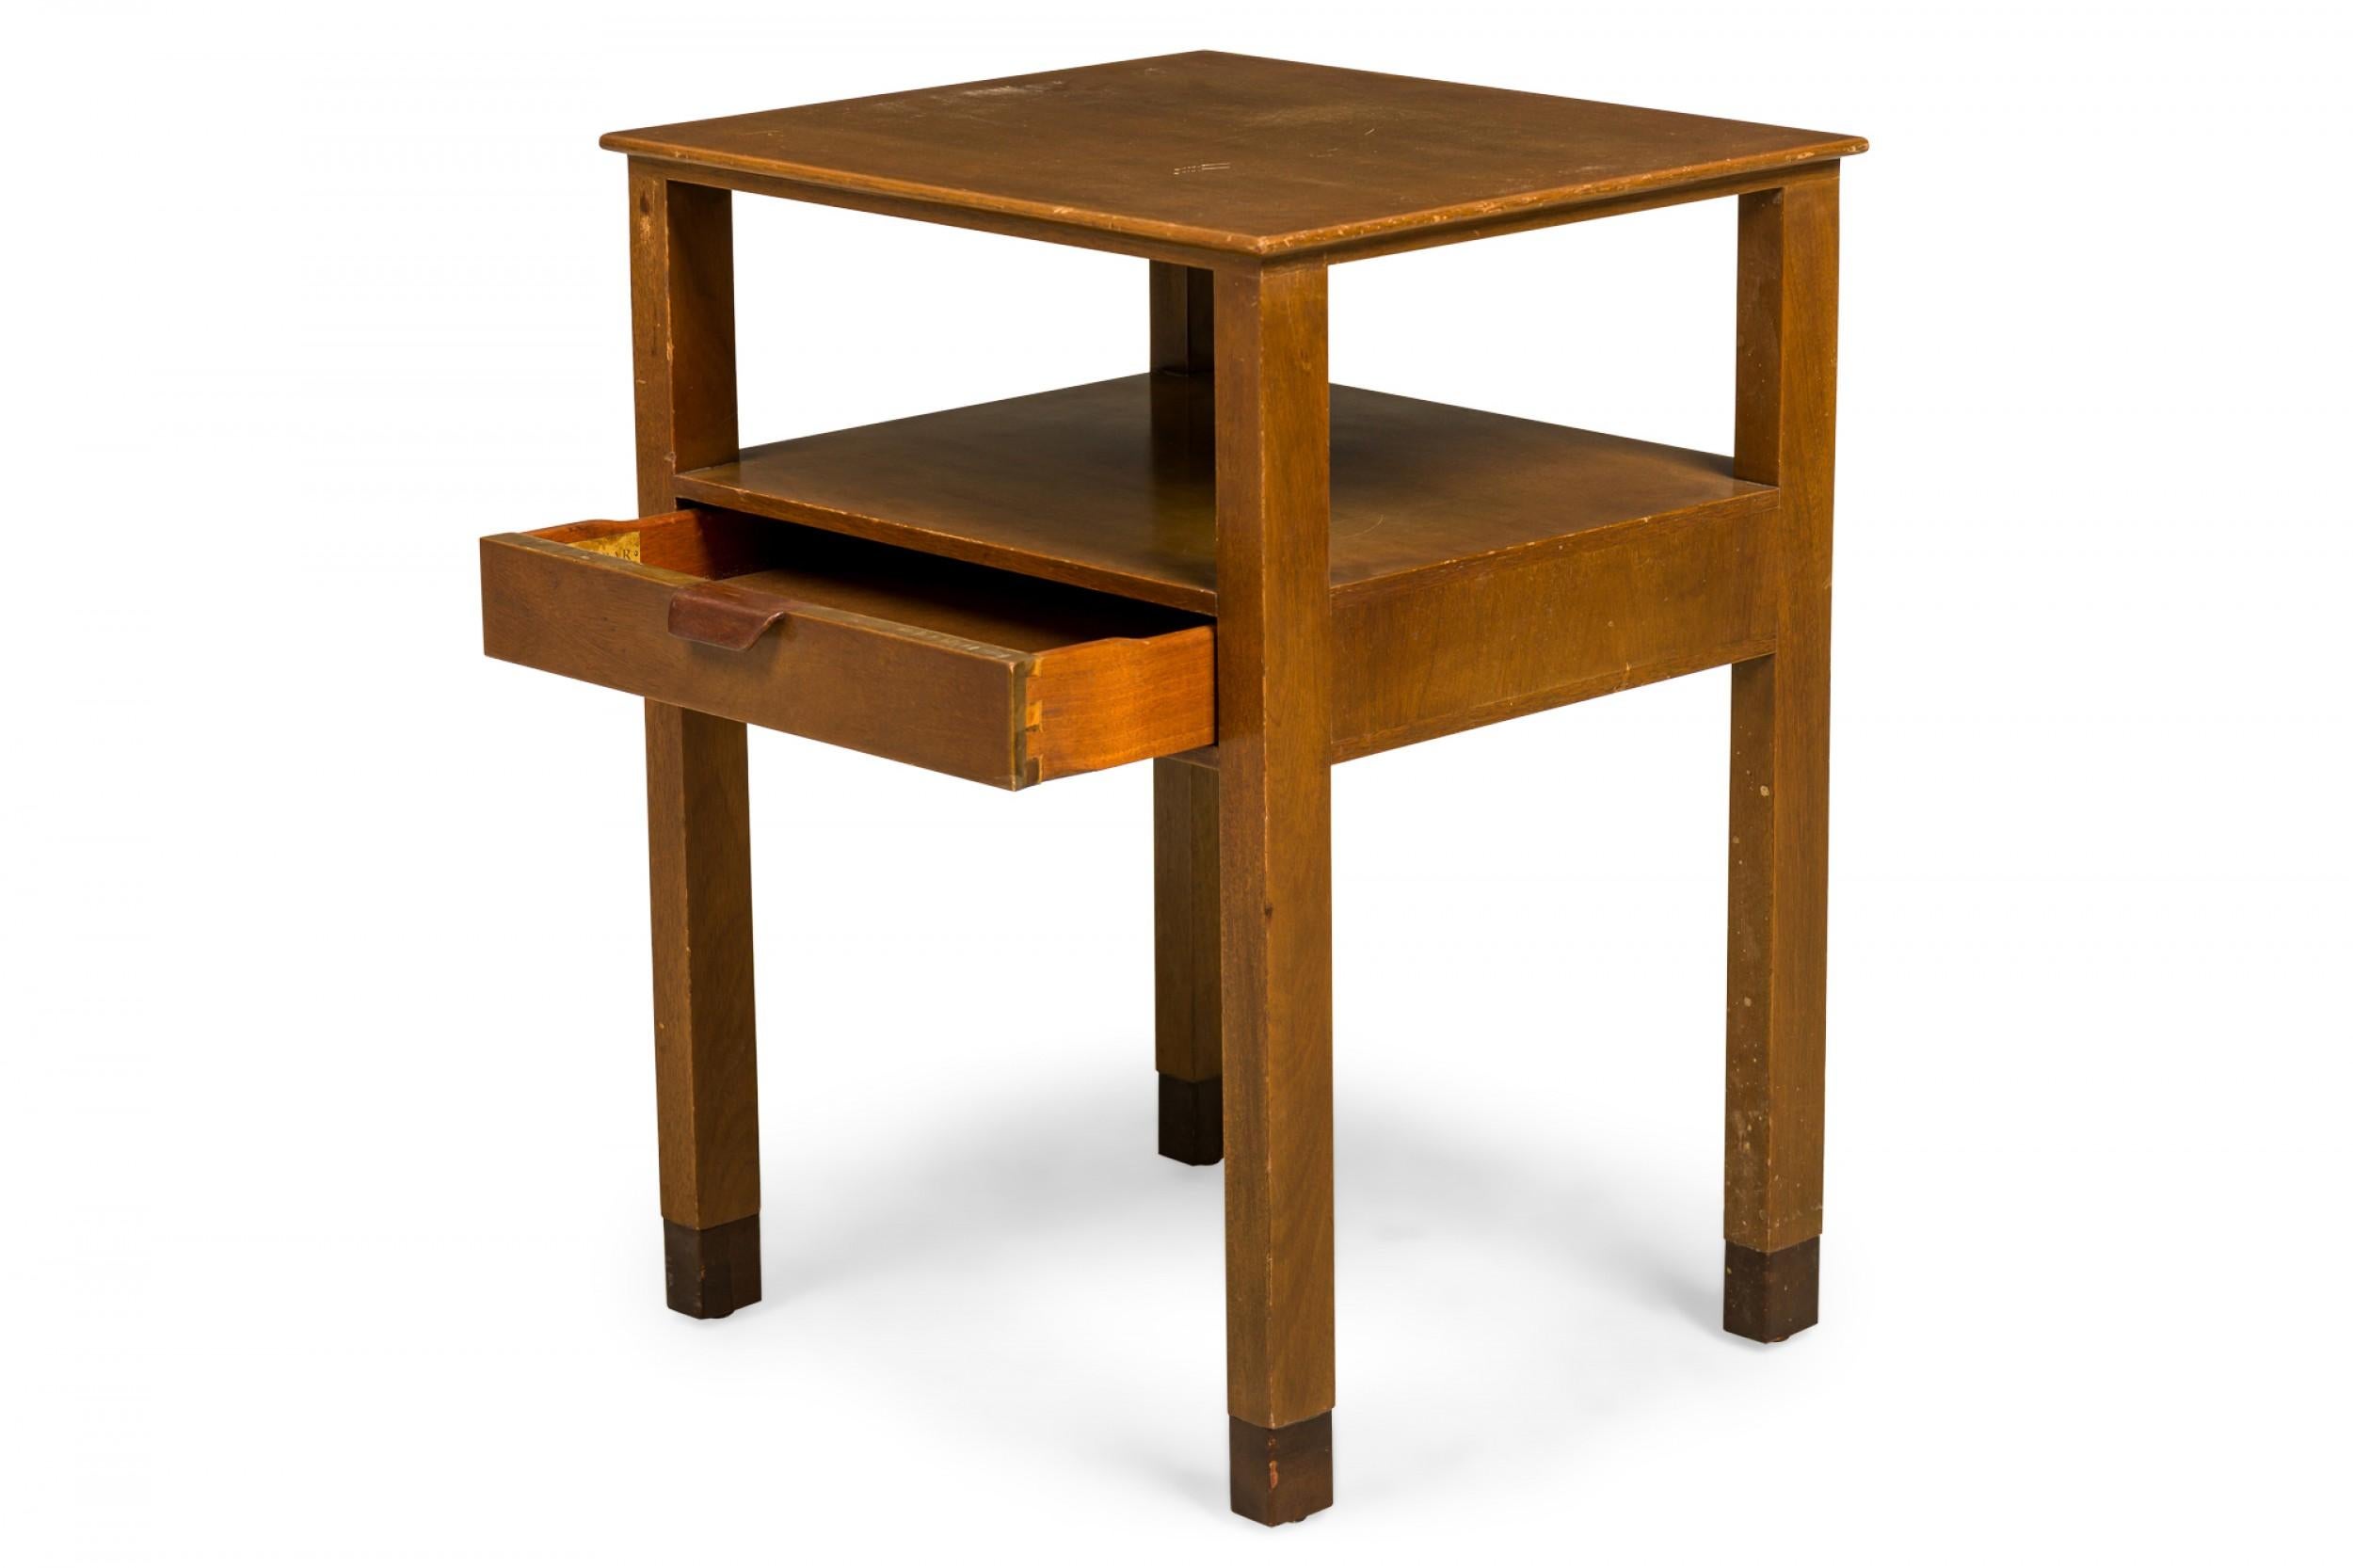 Pair of Edward Wormley for Dunbar Wooden Single Drawer Nightstands In Good Condition For Sale In New York, NY